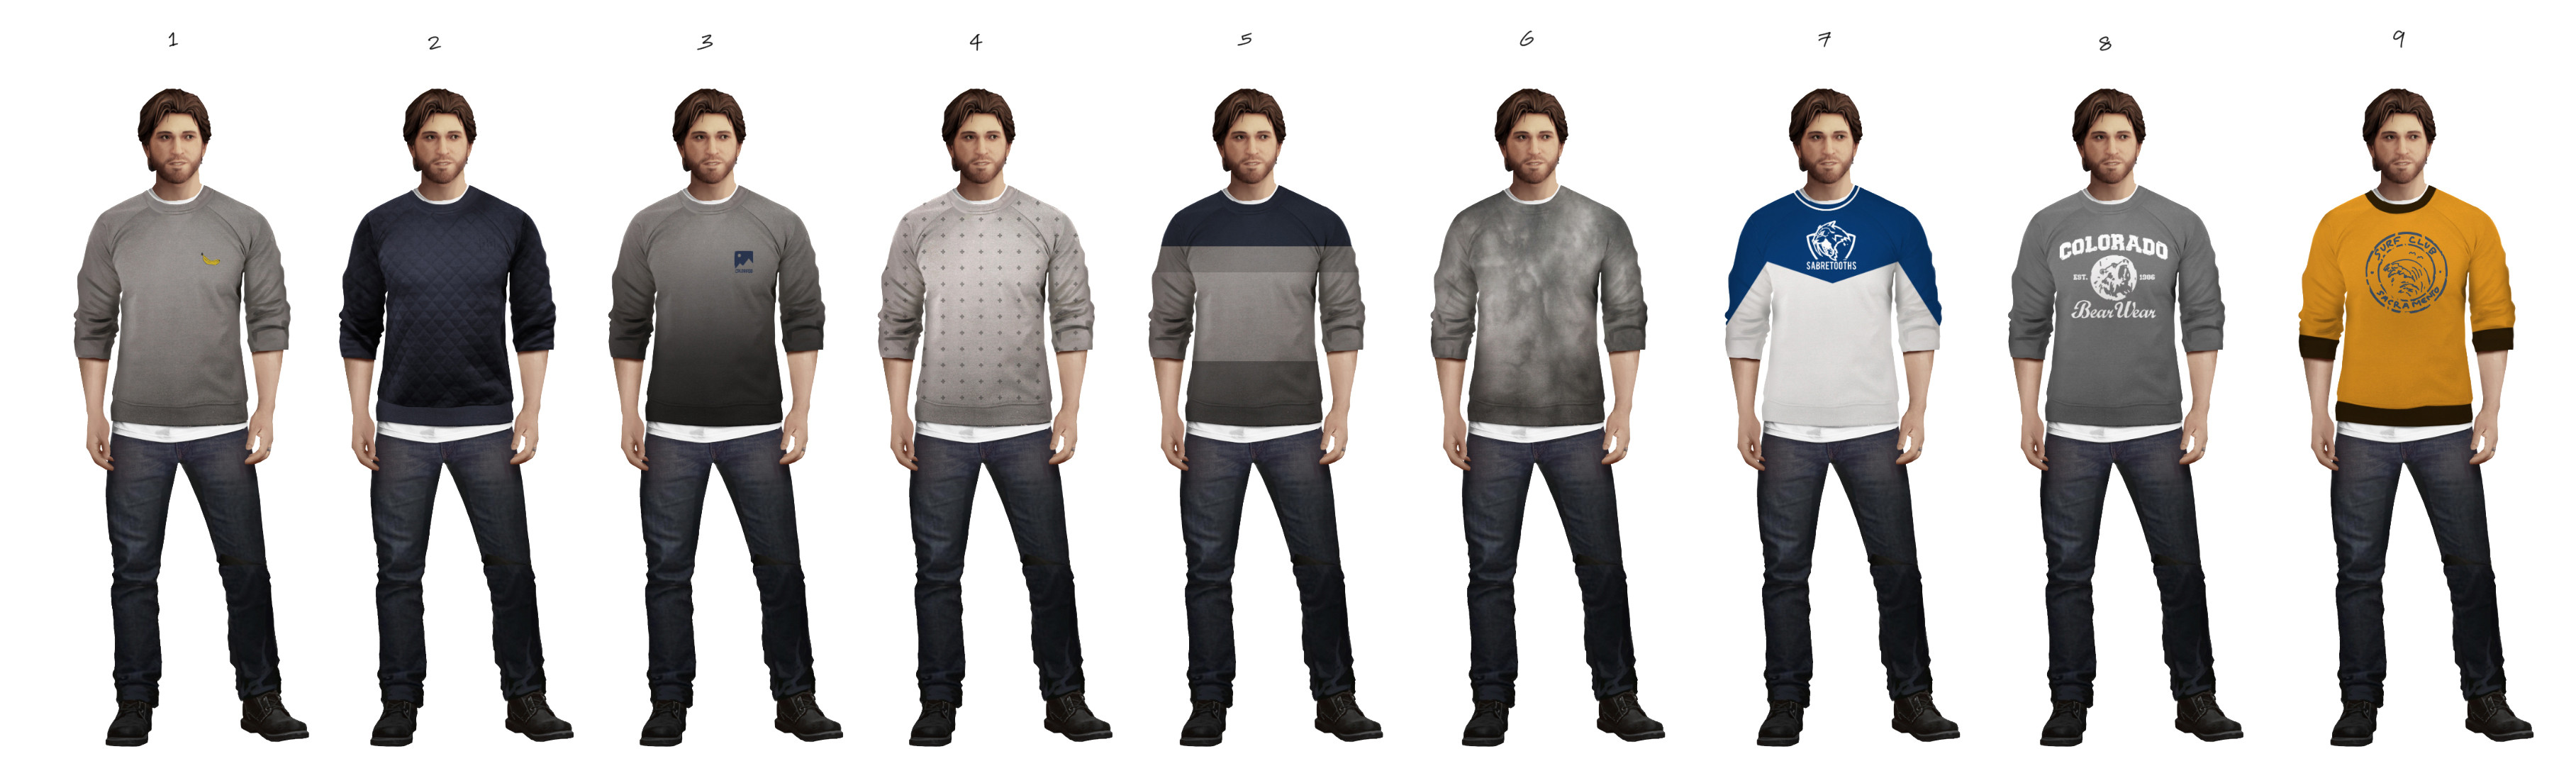 Chapter 6 - Ryan Outfit Options